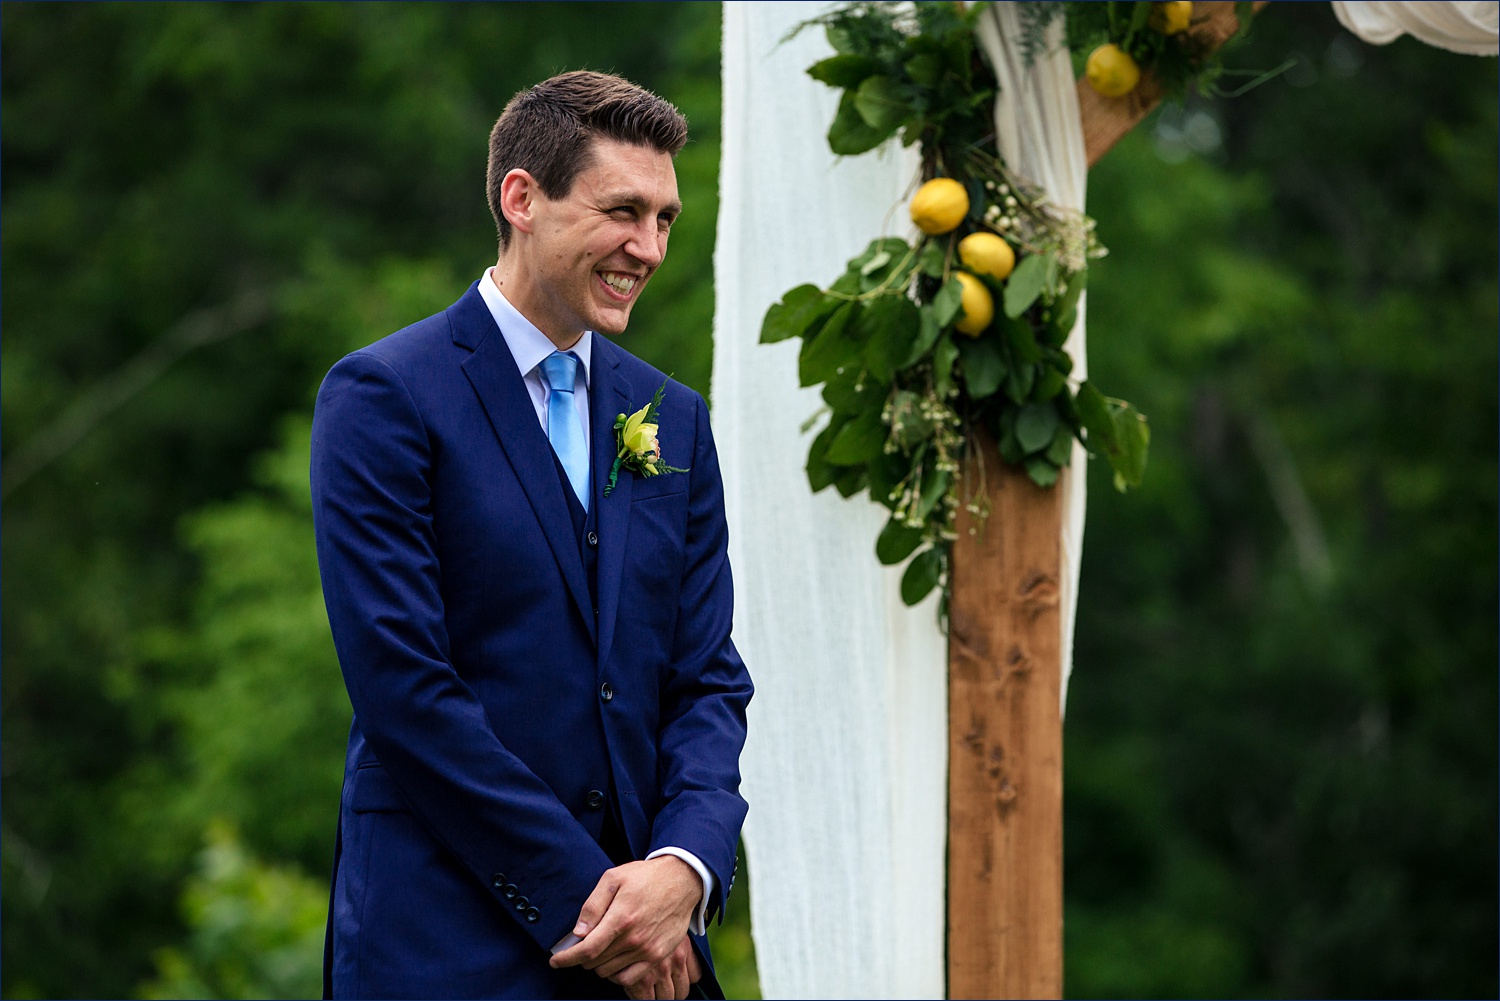 The groom smiles big at the bride during their outdoor wooded ceremony